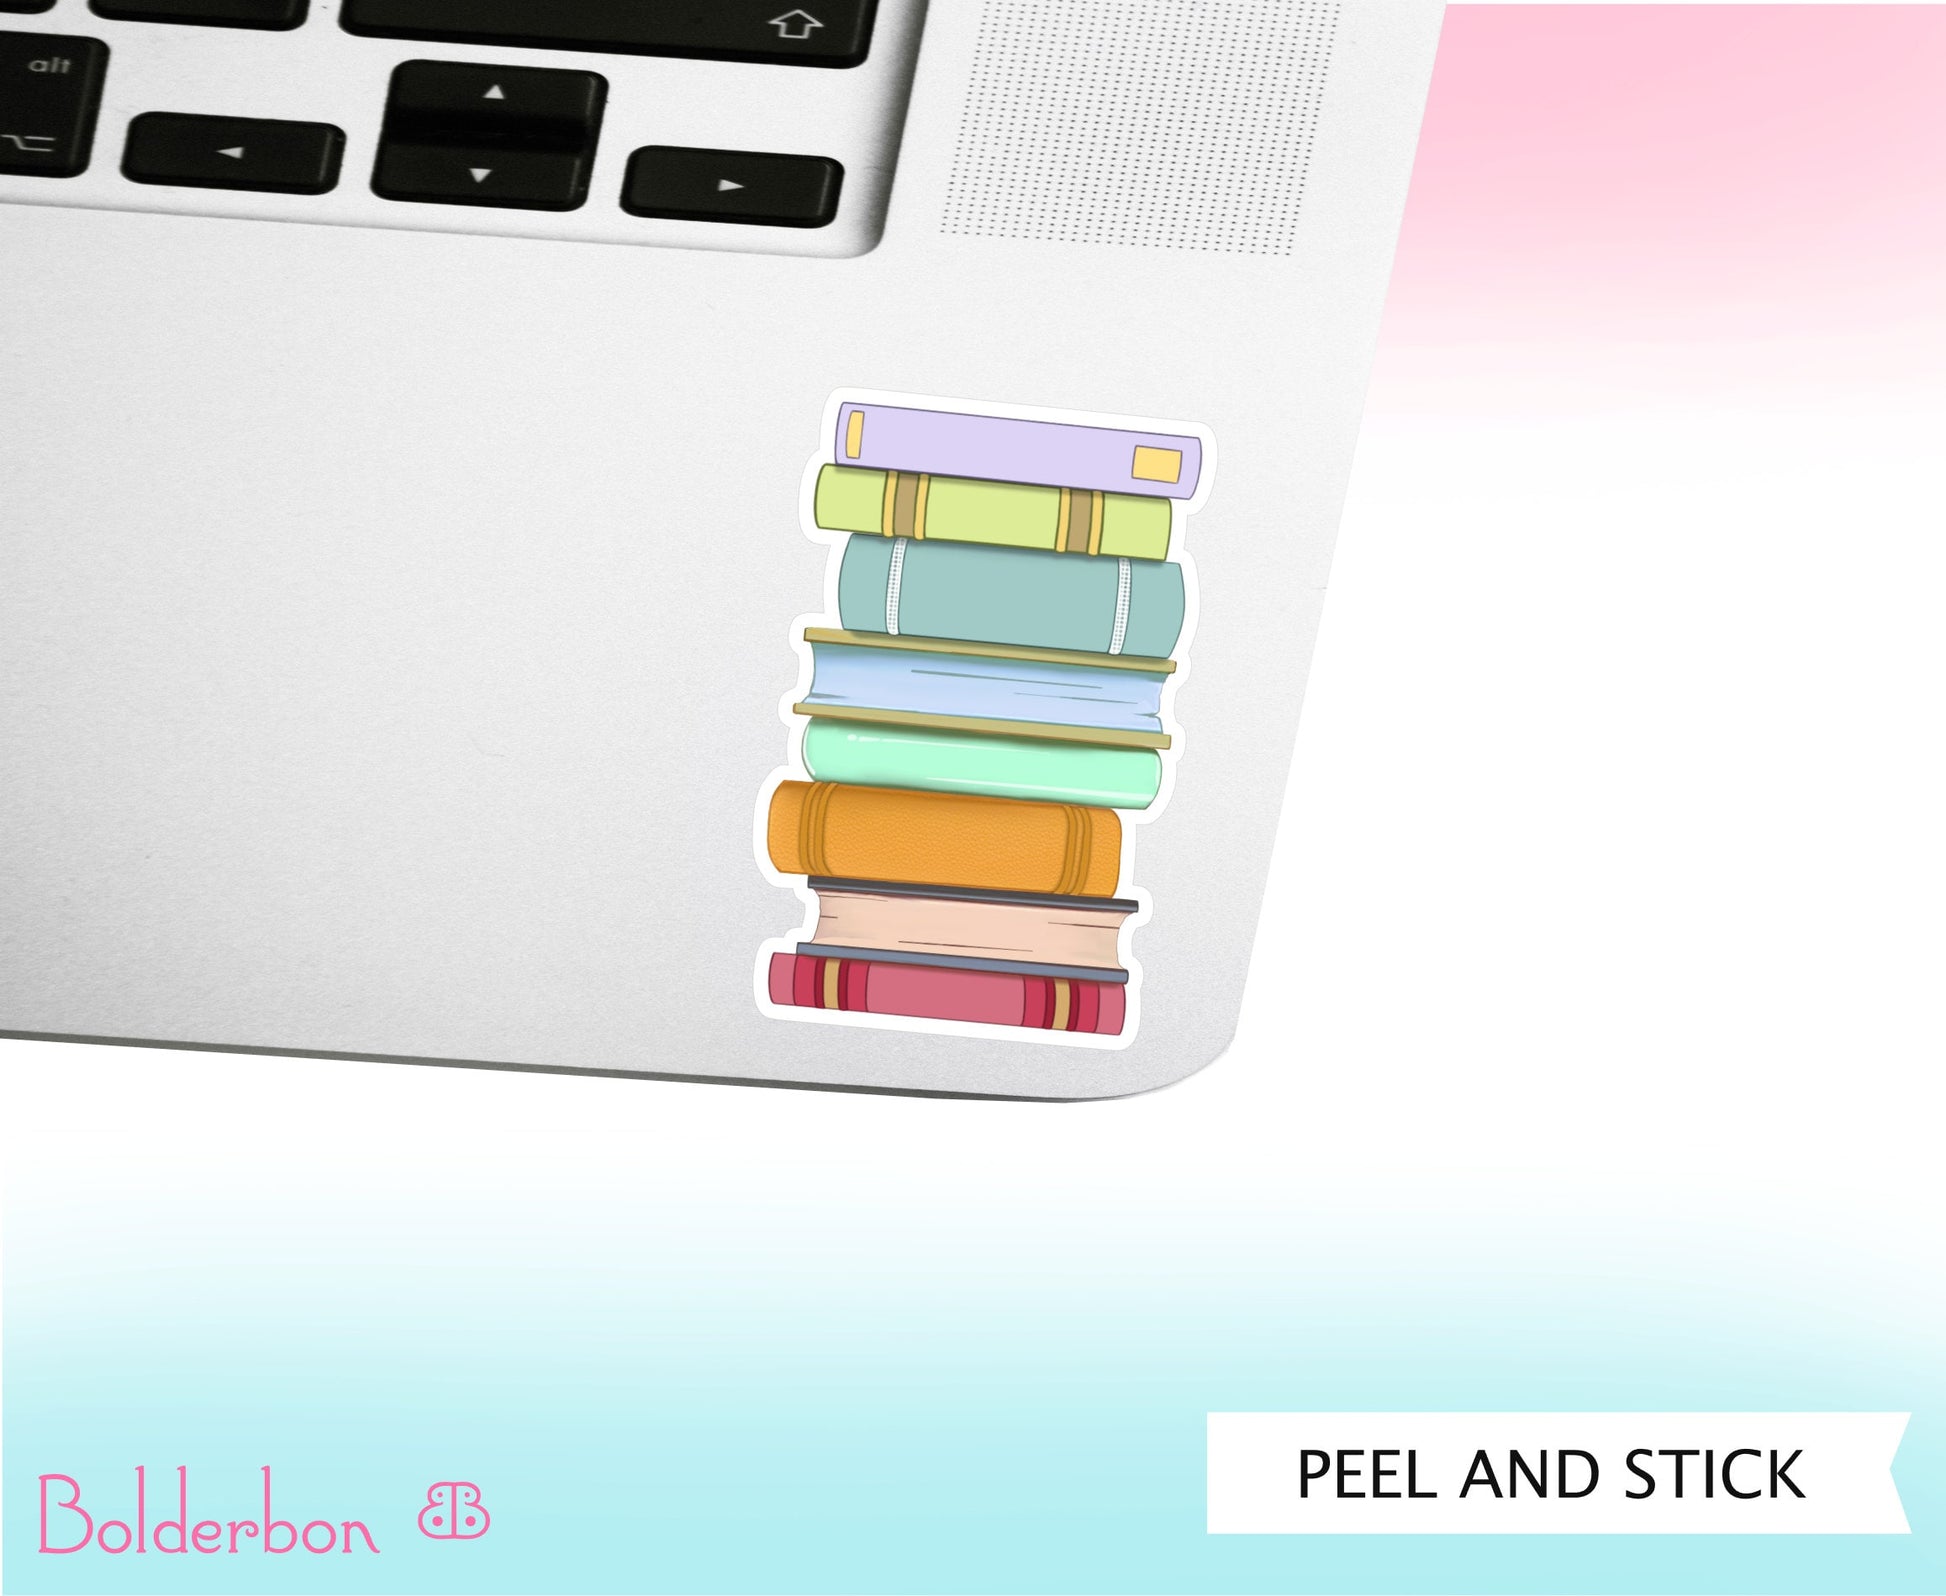 BOOK STACK STICKER || Reading, Book Lover Gift, Bookish, Journal Sticker, Kindle Stickers, Library, Vinyl